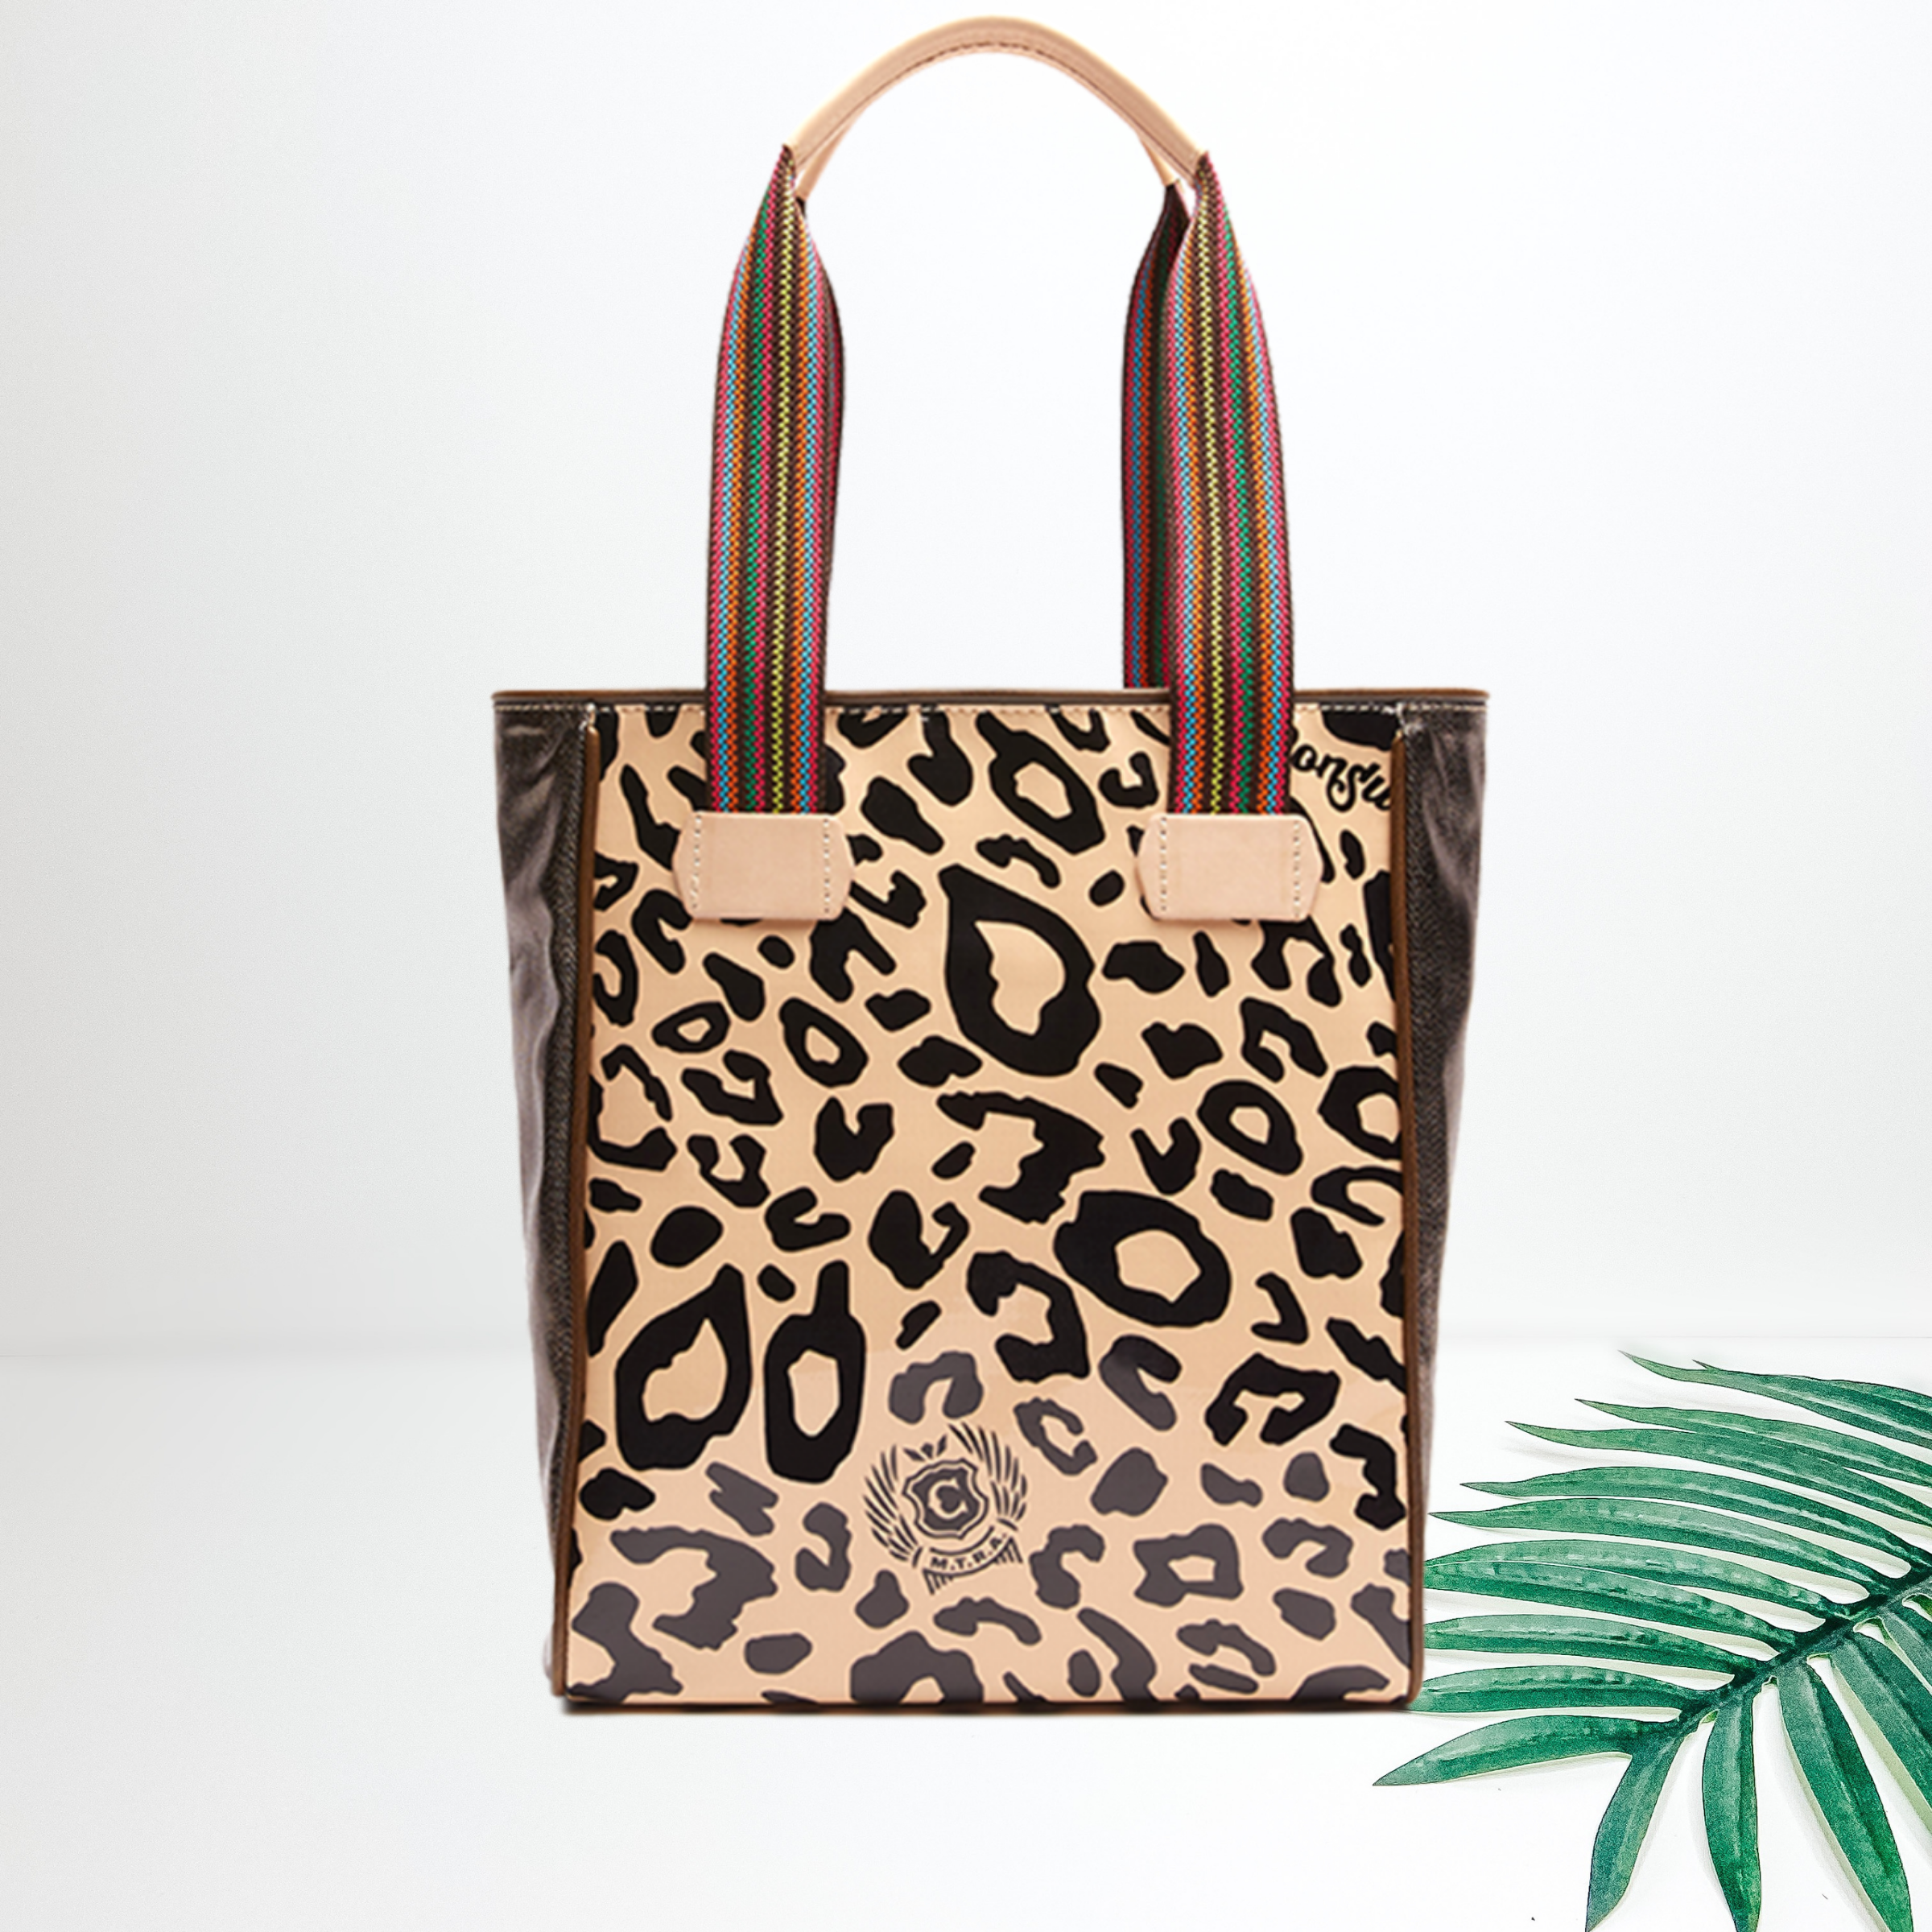 Centered in the picture is a tote bag in tan cheetah. To the right of the tote is a palm left, all on a white background.